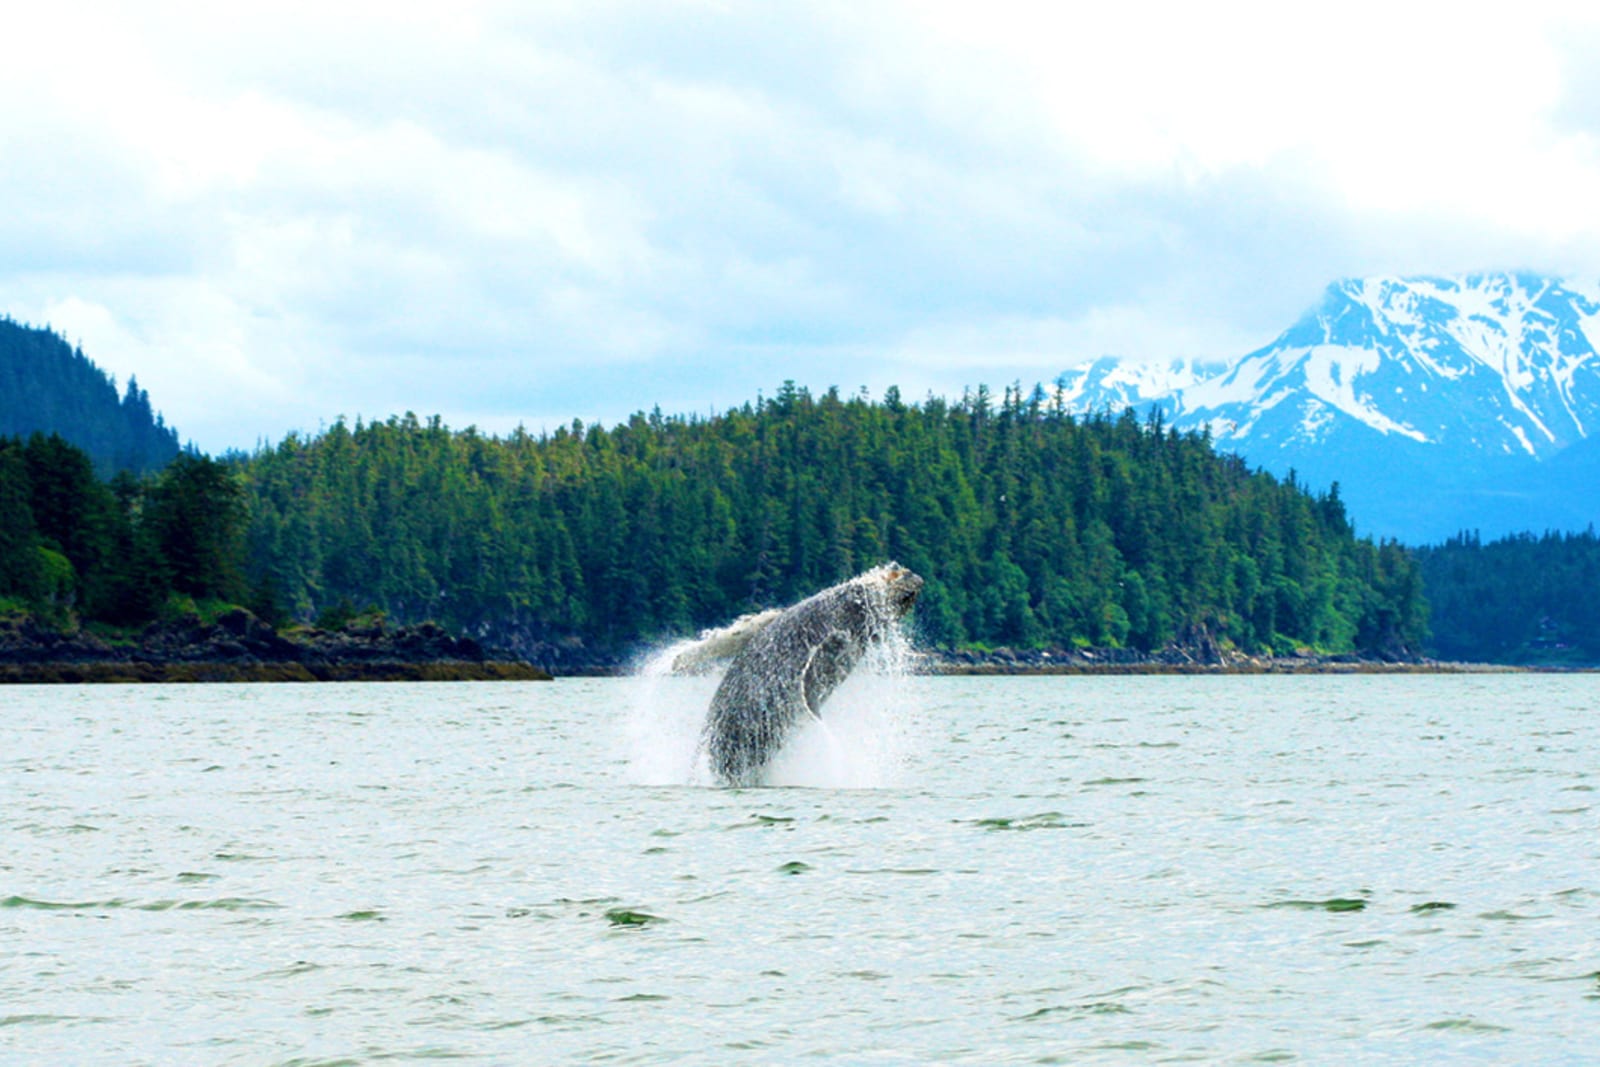 Some of the best Alaska cruise ships give you the opportunity to view whales in their natural habitat